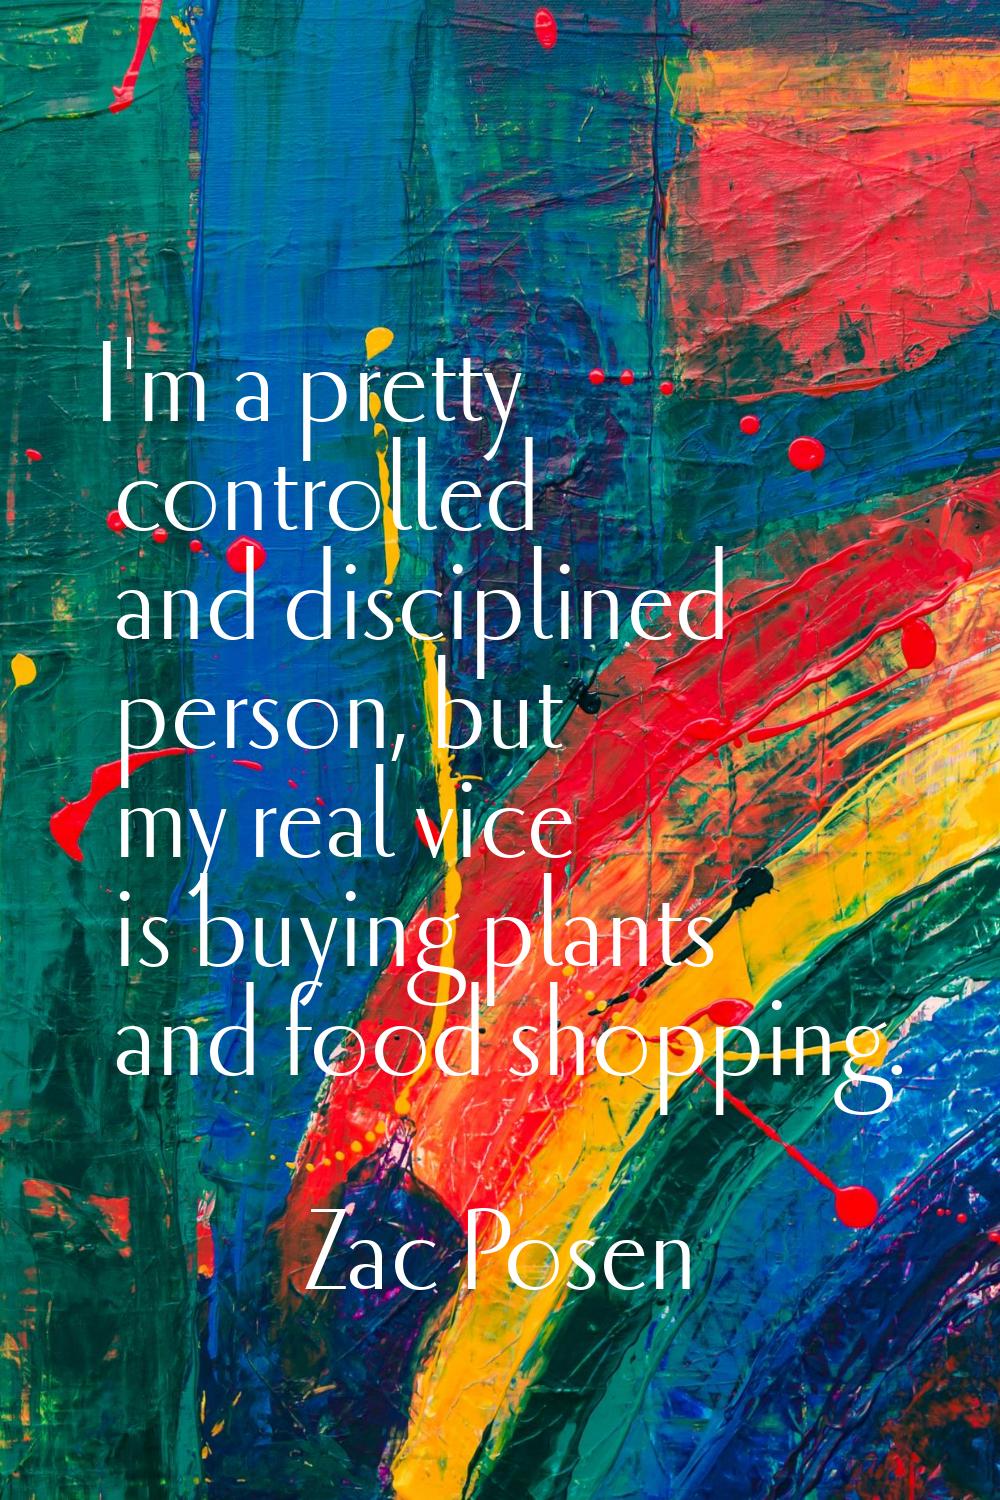 I'm a pretty controlled and disciplined person, but my real vice is buying plants and food shopping